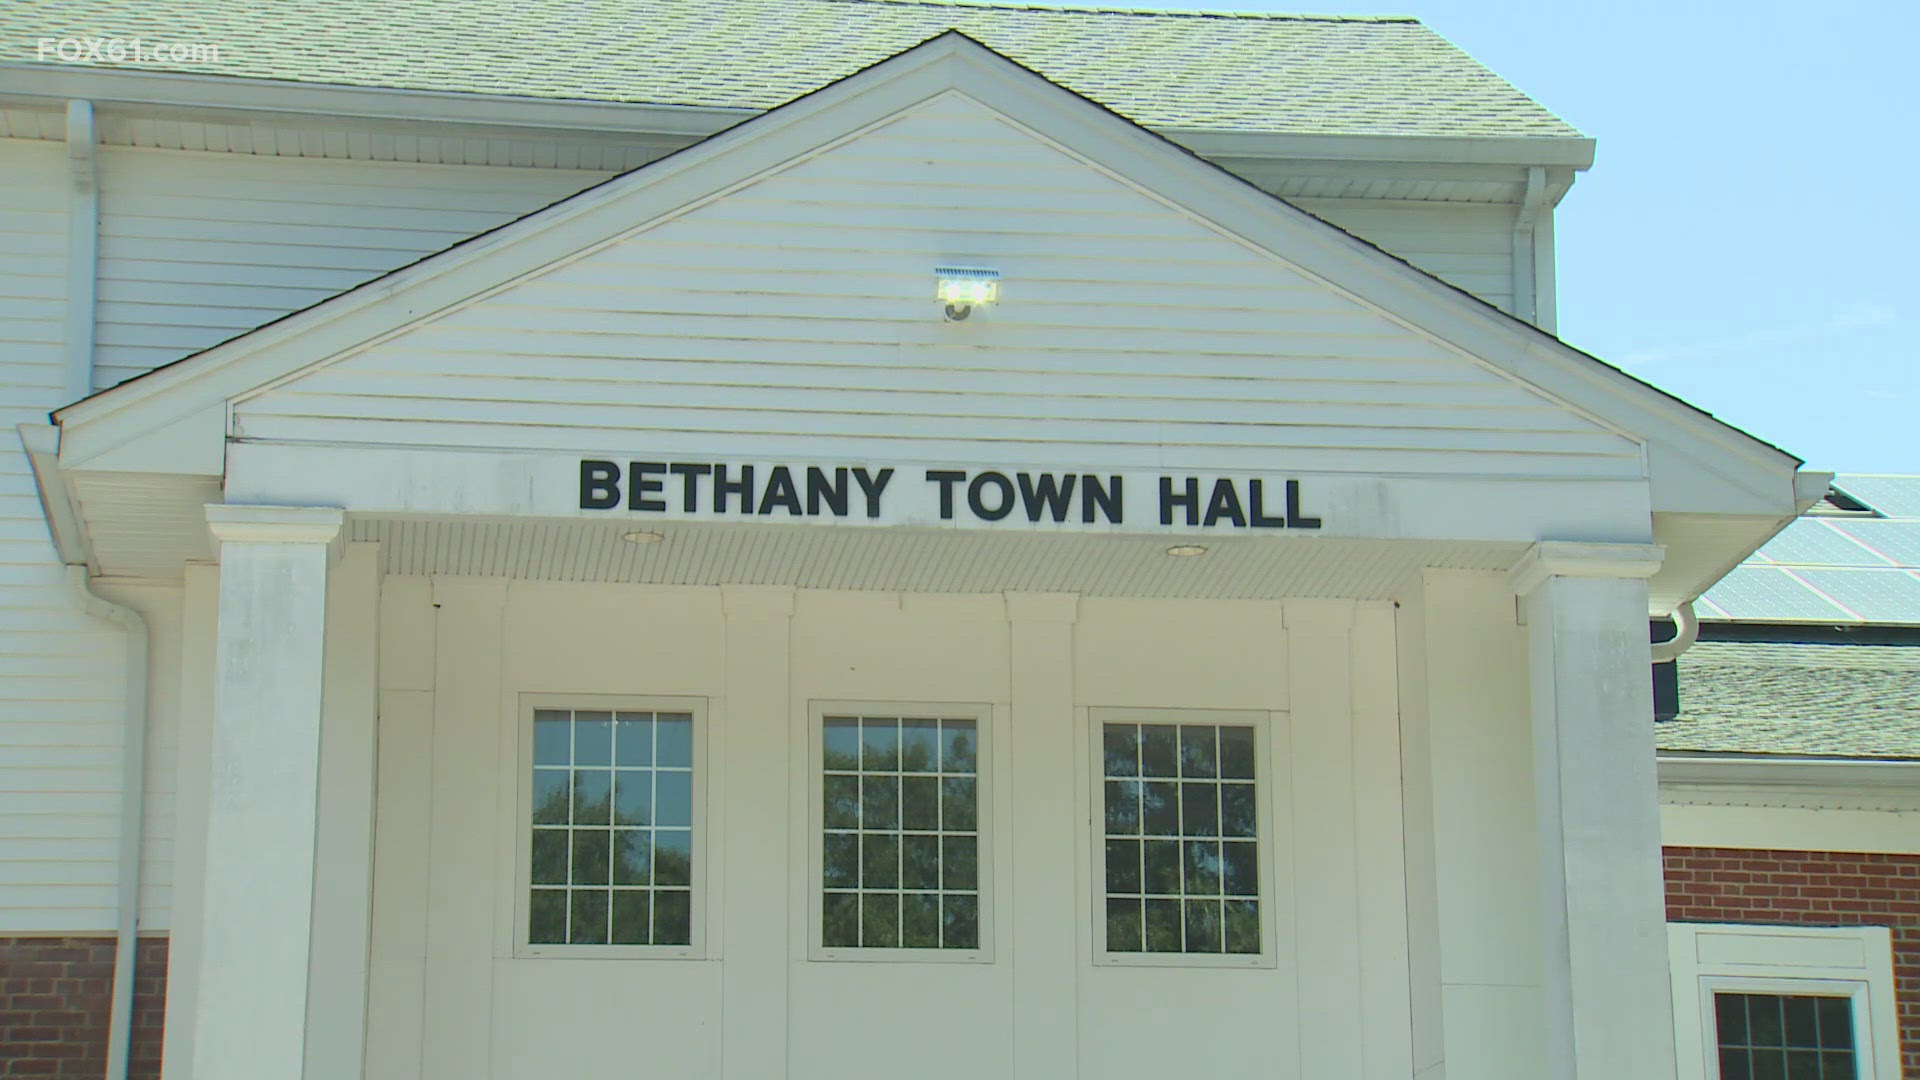 In a town meeting Tuesday, parents expressed concerns about the communication from town leaders about the investigation.